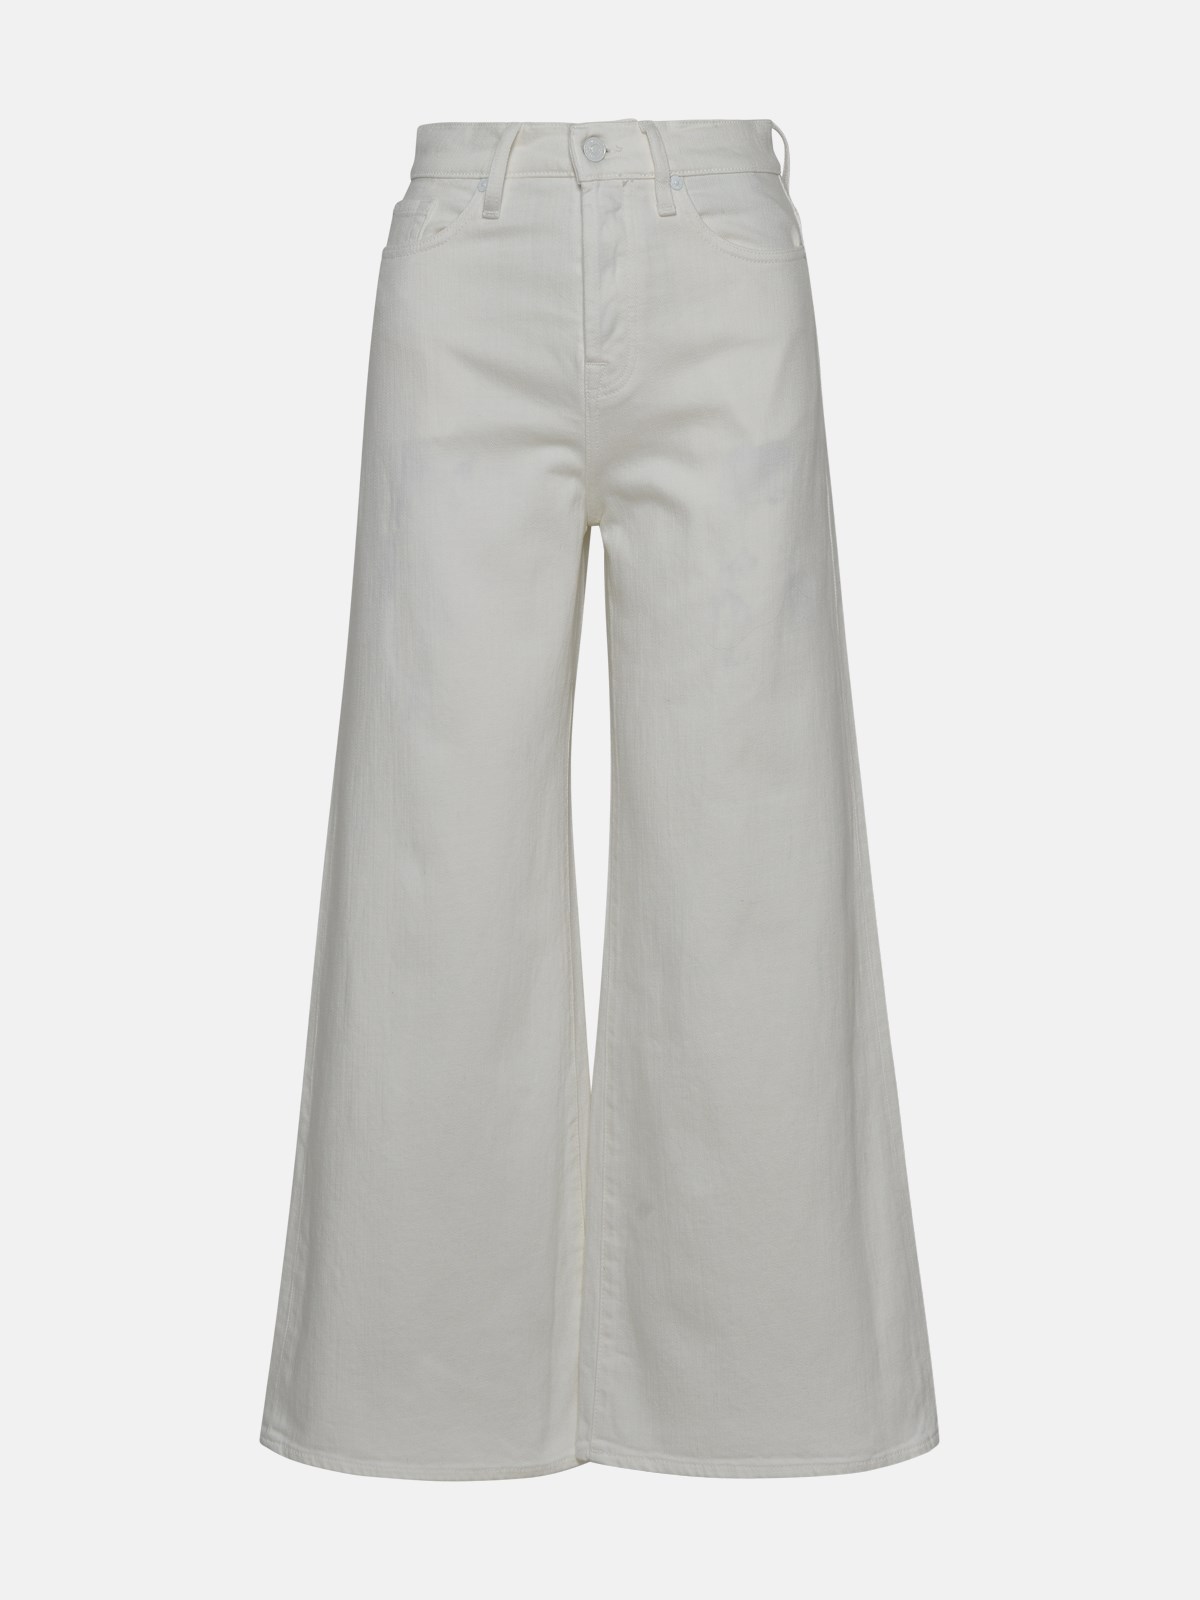 7 For All Mankind White Cotton Blend Zoey Jeans